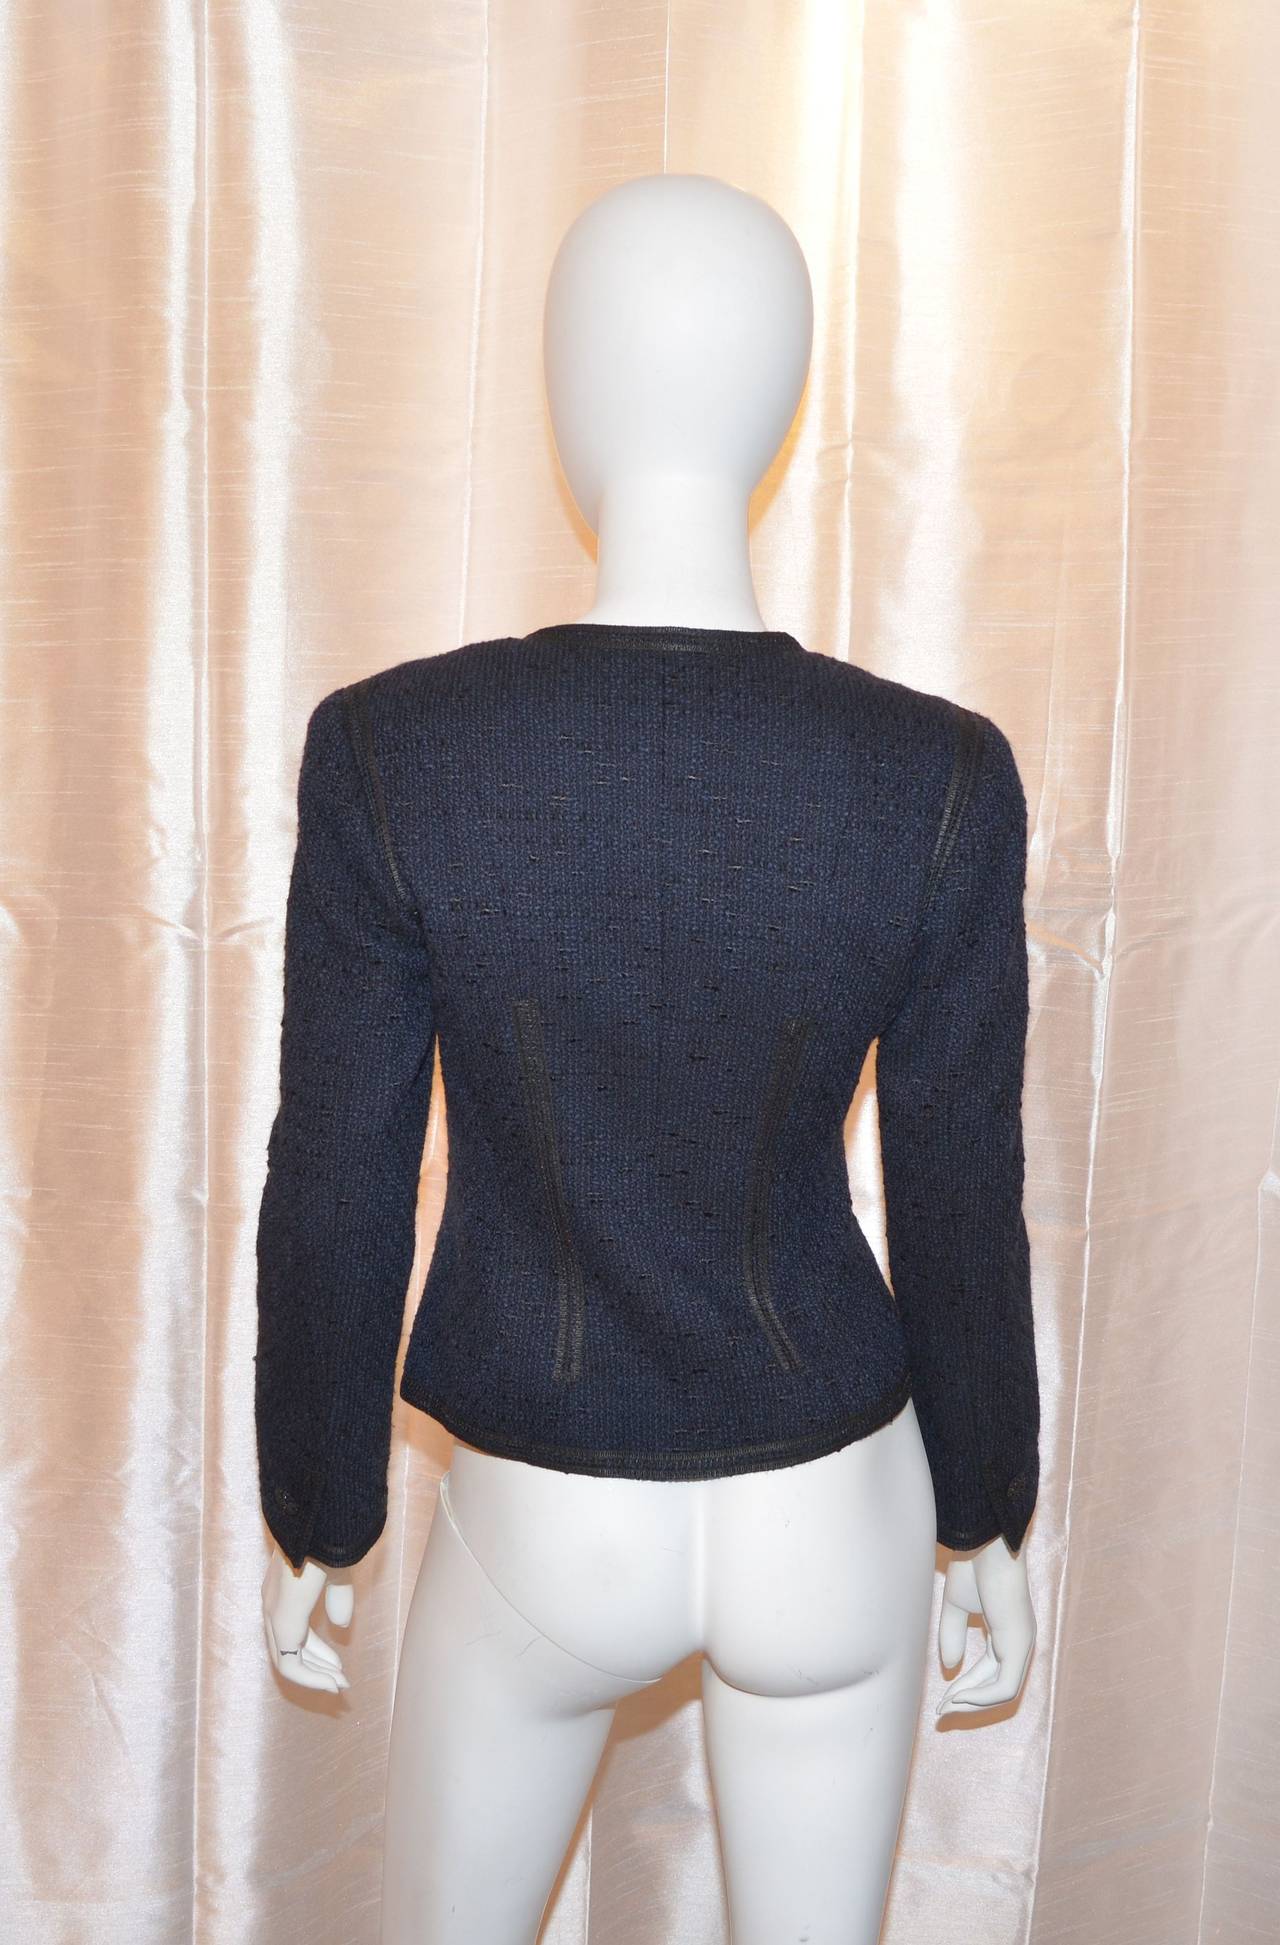 Chanel tweed blazer features an asymmetric collar, three rhinestone button closures along the front center and identical buttons on the cuffs. Blazer is fully lined with 95% silk and 5% spandex; made with 54% wool, 34% cotton, 11% rayon, and 1%